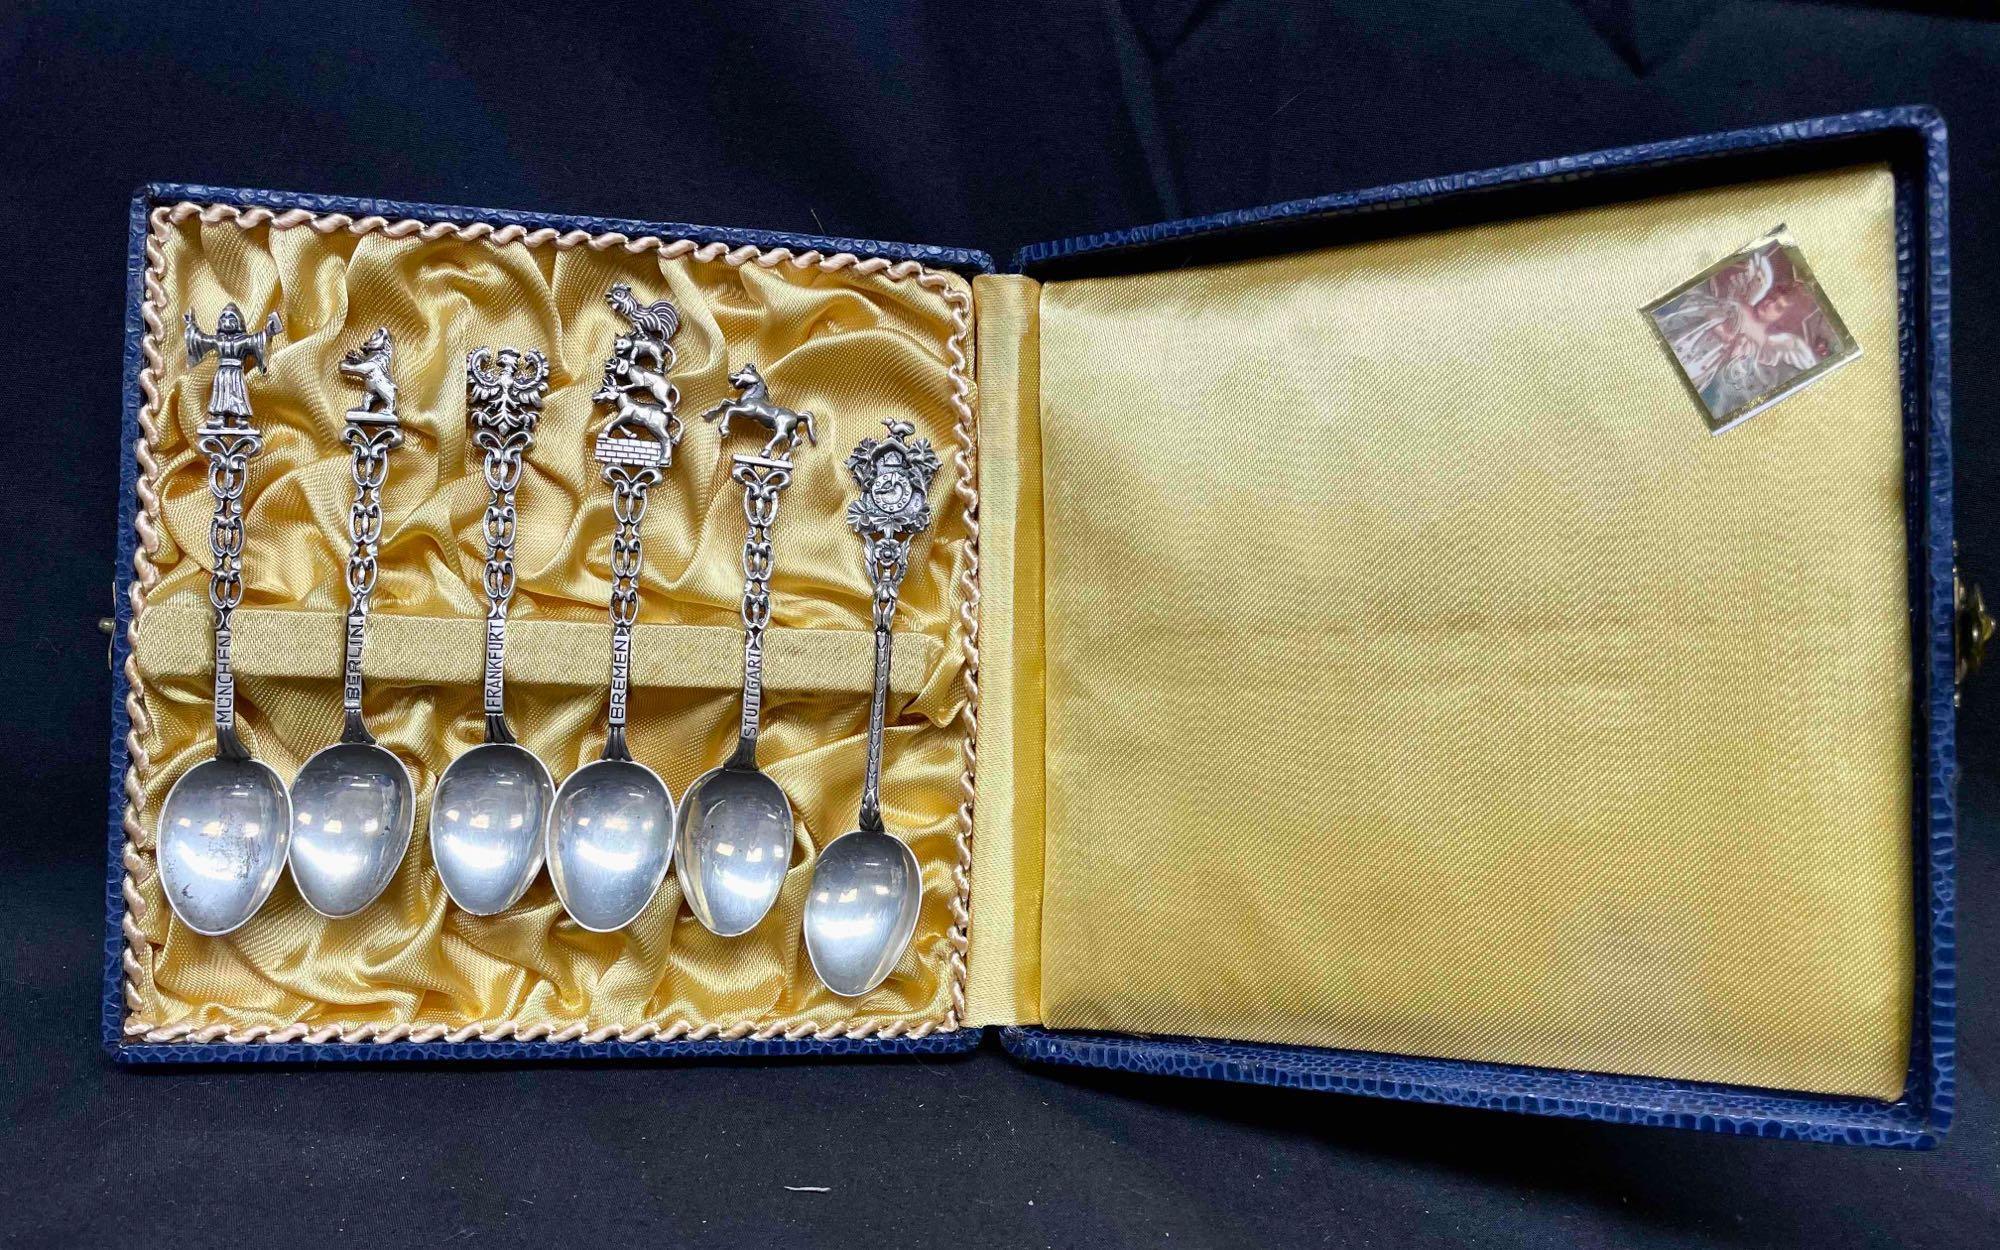 18k Gold Fancy Spoon Set. May be Plated. 53.9g 836 German mark